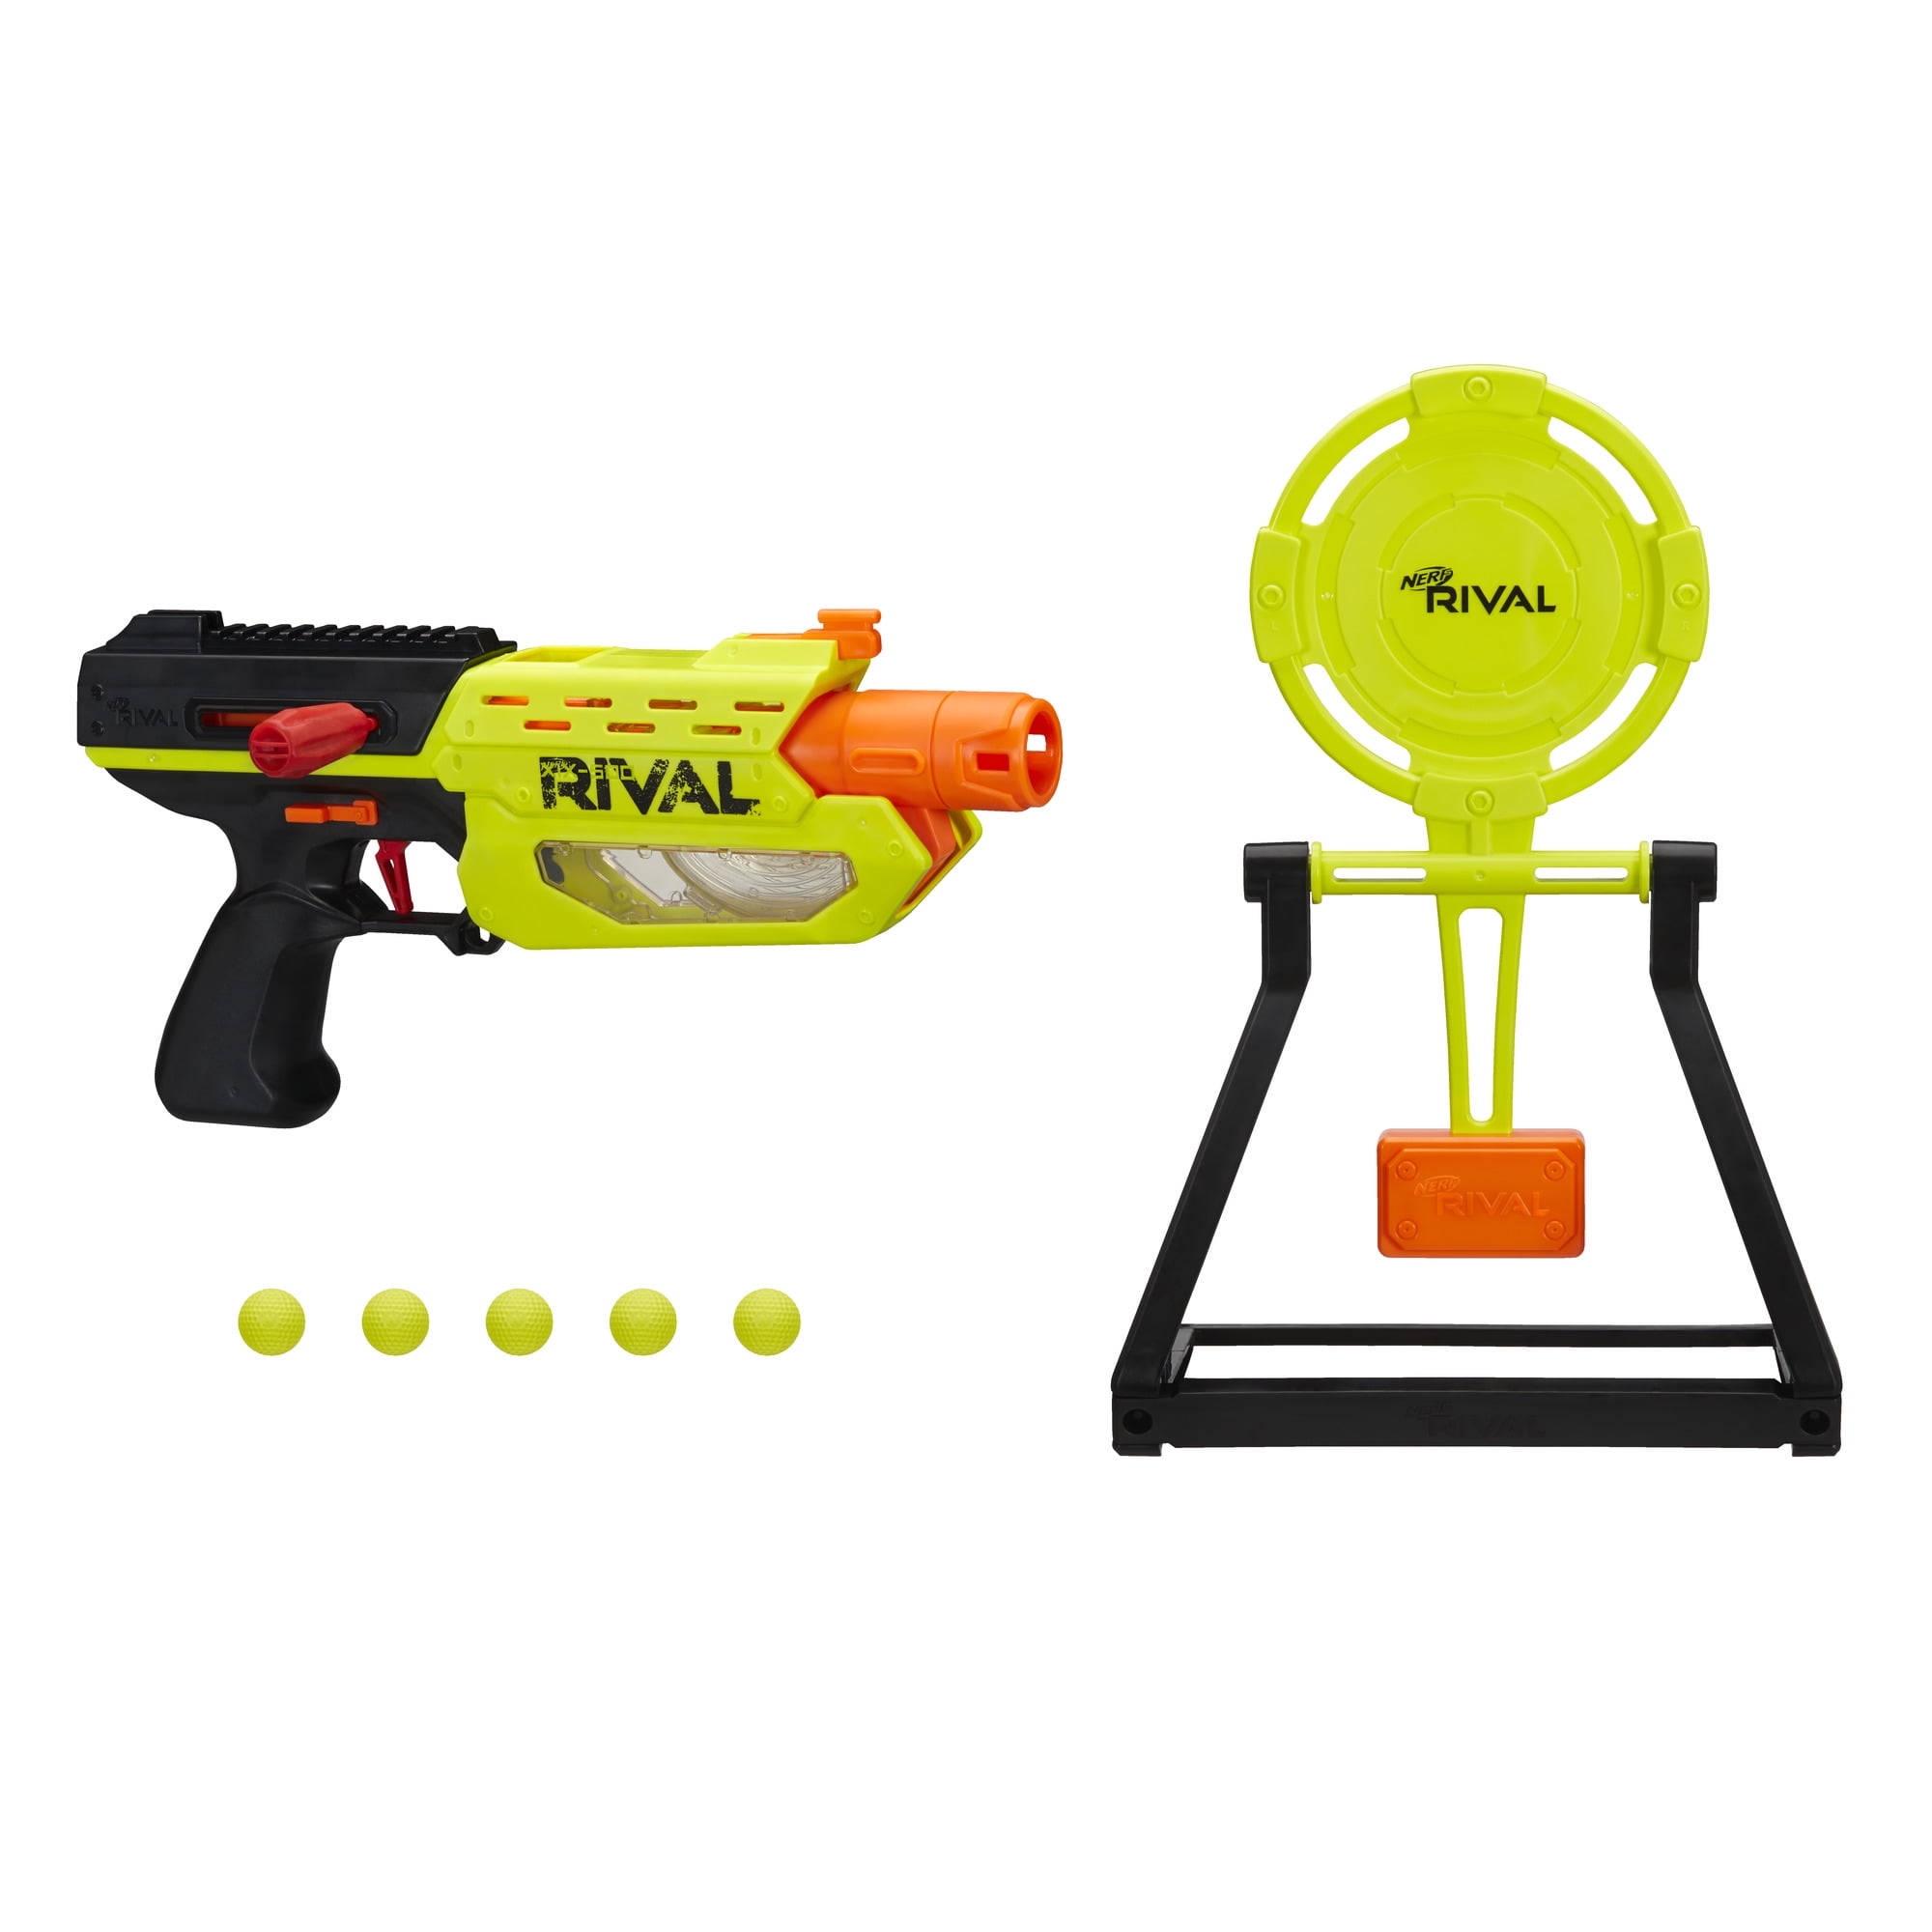 Kids Play Rival Blaster Jupiter XIX-1000 Edge Series Target 10 Rounds Ages 14 Up 